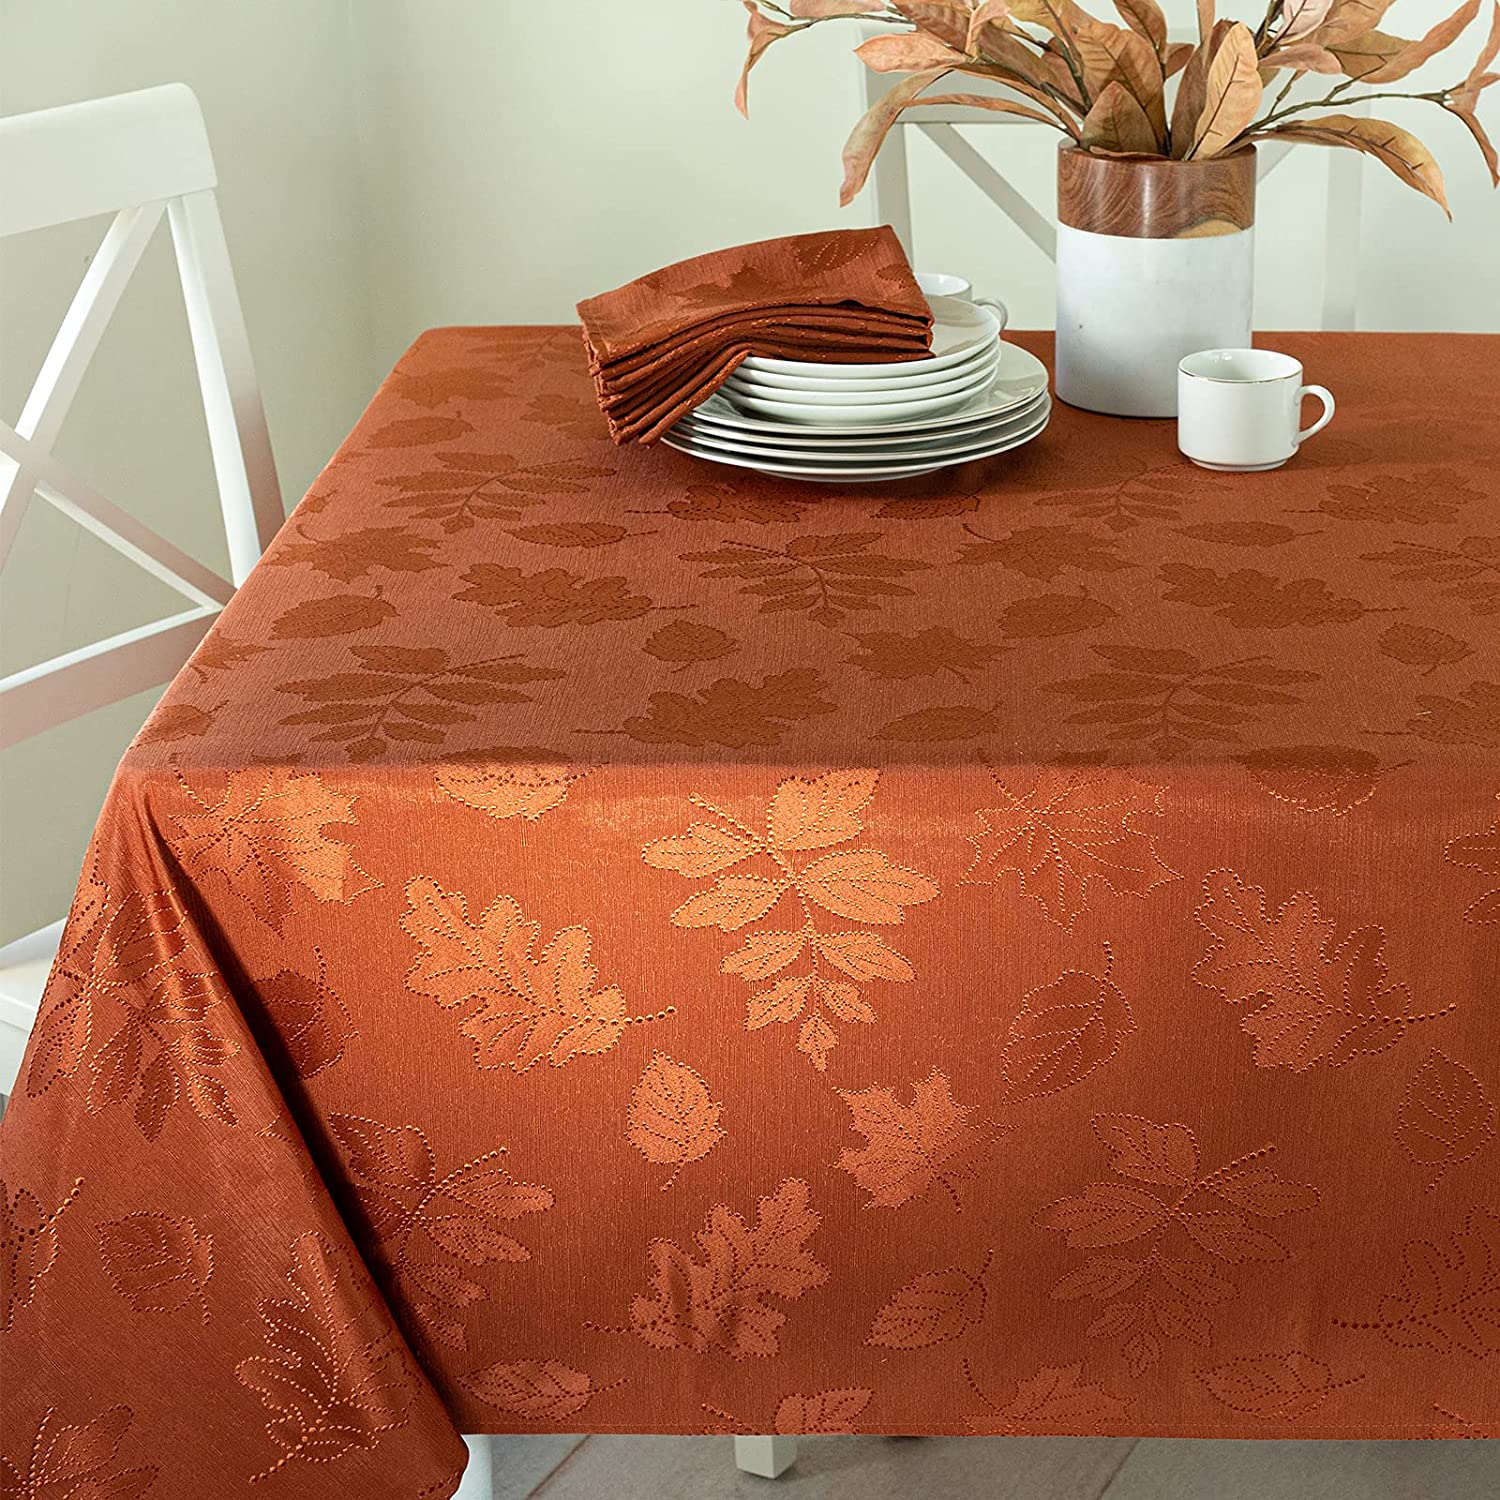 60" x 48" Thanksgiving Tablecloth Tablecover Fabric Table Cloth for Fall